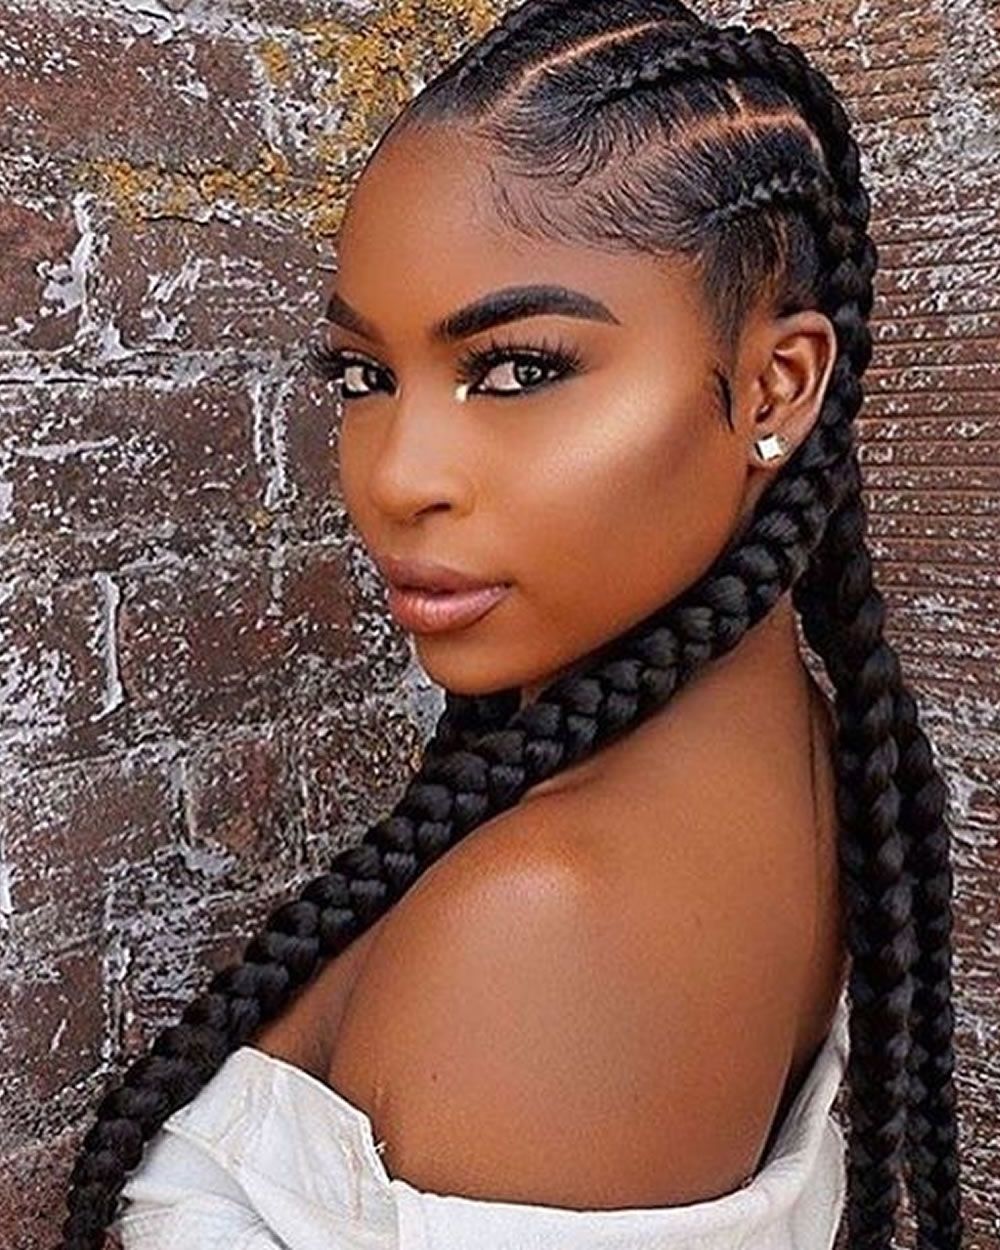 Cornrow Hairstyles For Black Women 2018 2019 – Page 2 – Hairstyles Regarding Recent Cornrows Hairstyles For Black Hair (View 11 of 15)